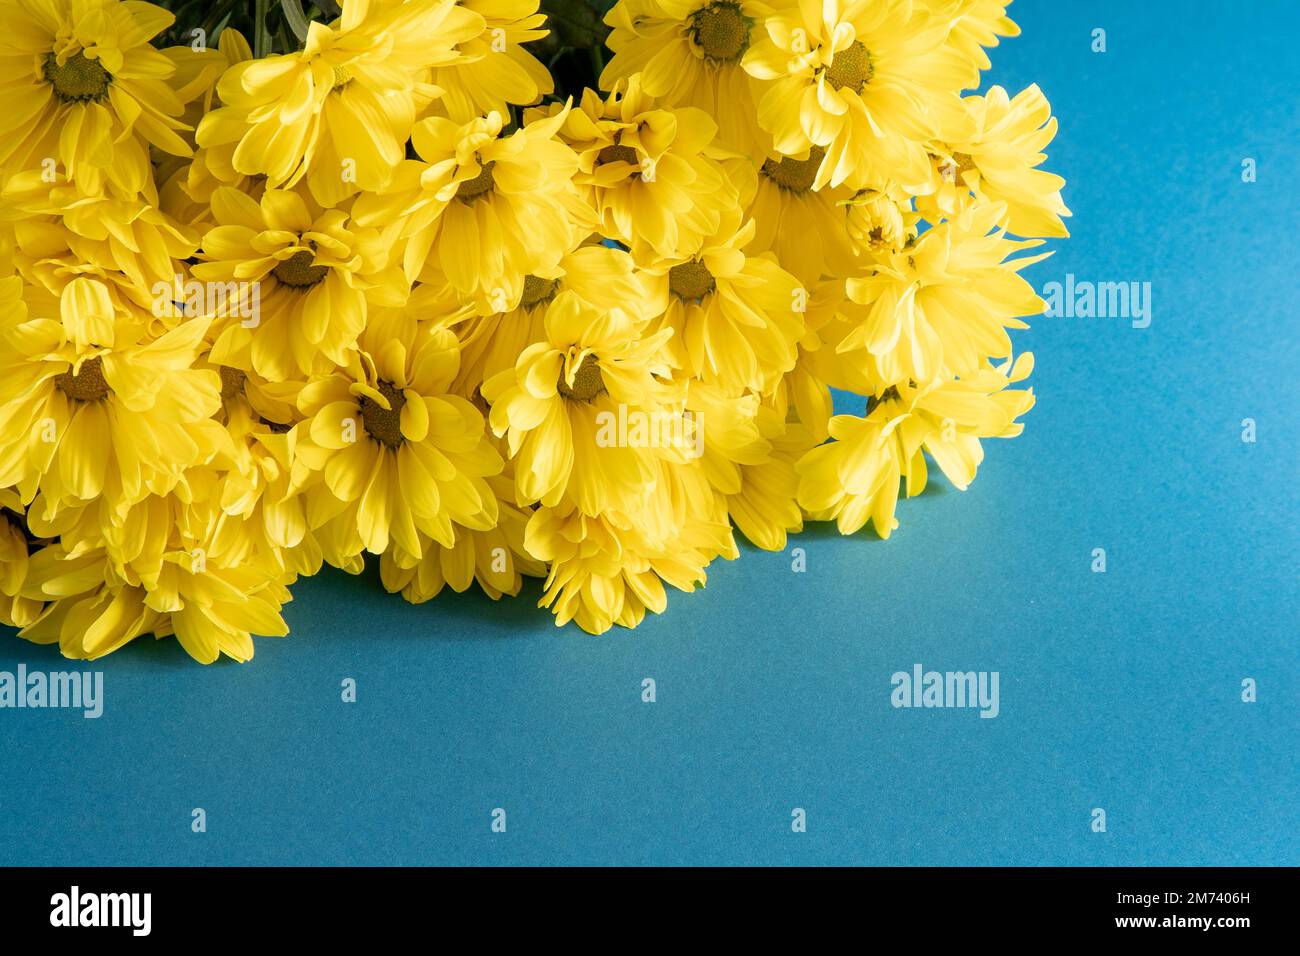 Yellow chrysanthemum flowers. Flower close-up. Floral flowers on blue background. Stock Photo